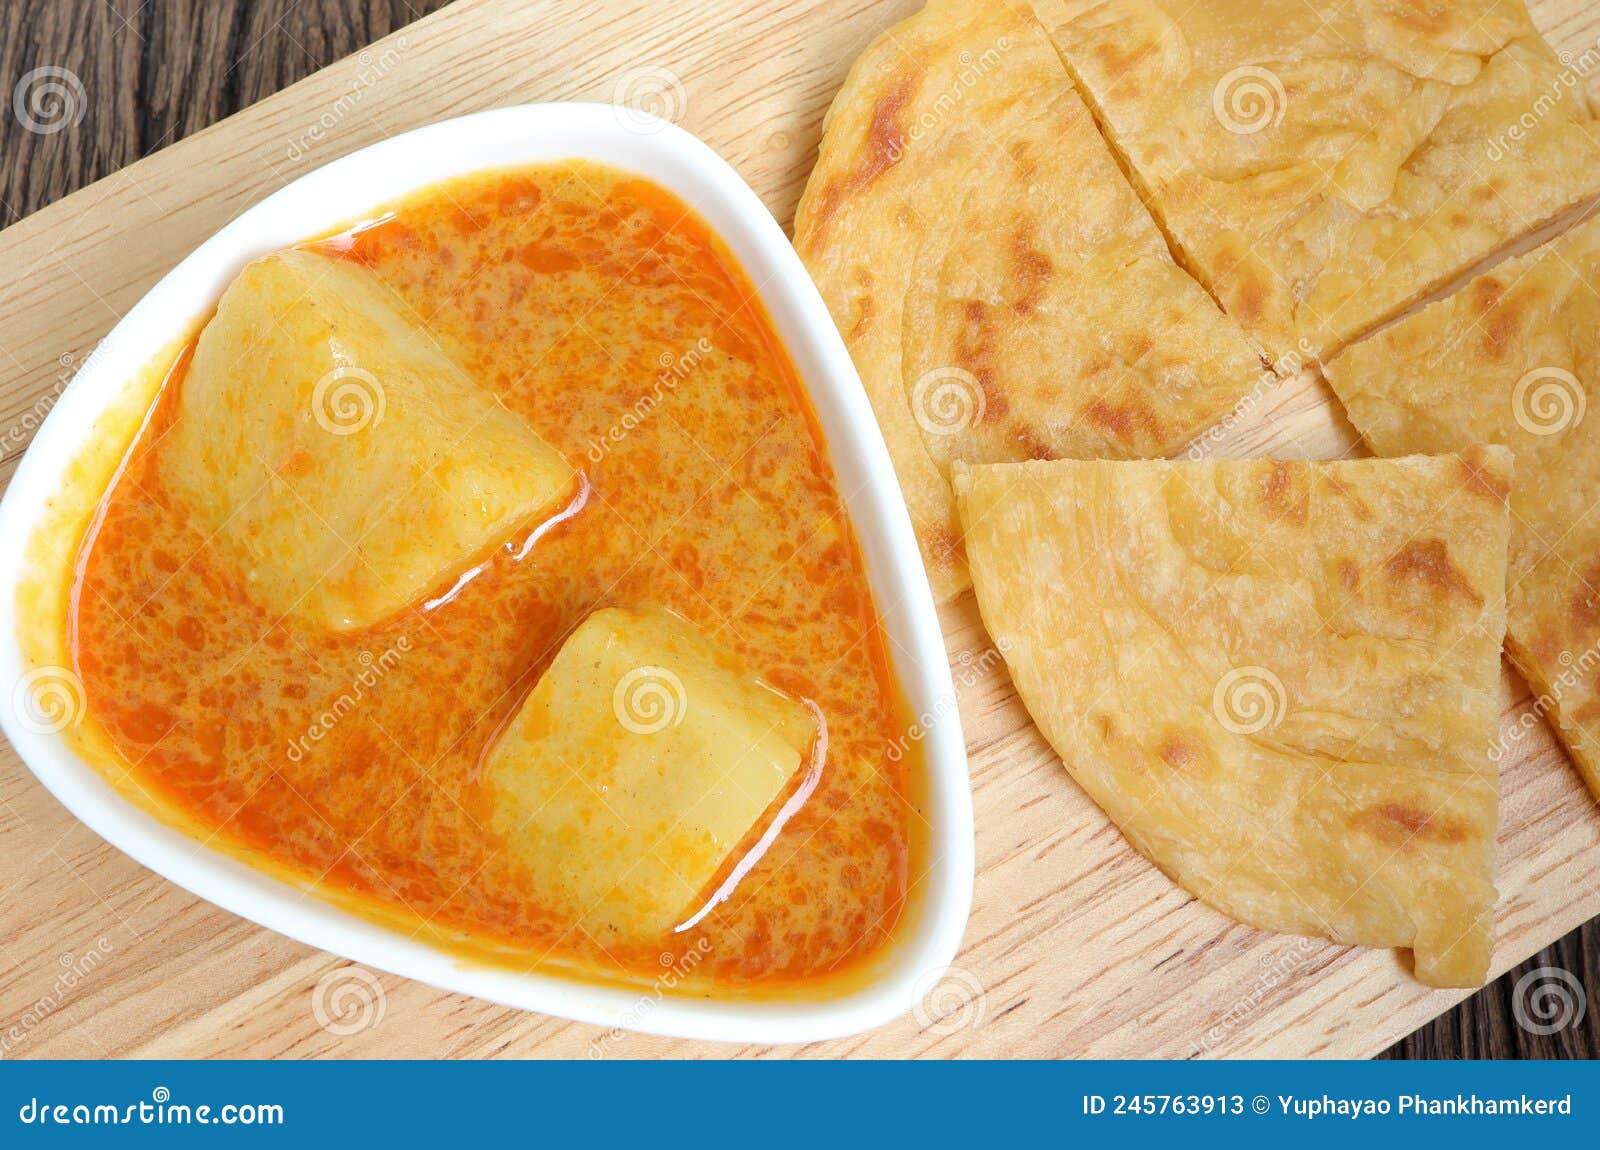 https://thumbs.dreamstime.com/z/roti-parata-canai-served-potato-curry-sauce-old-wooden-background-top-view-245763913.jpg